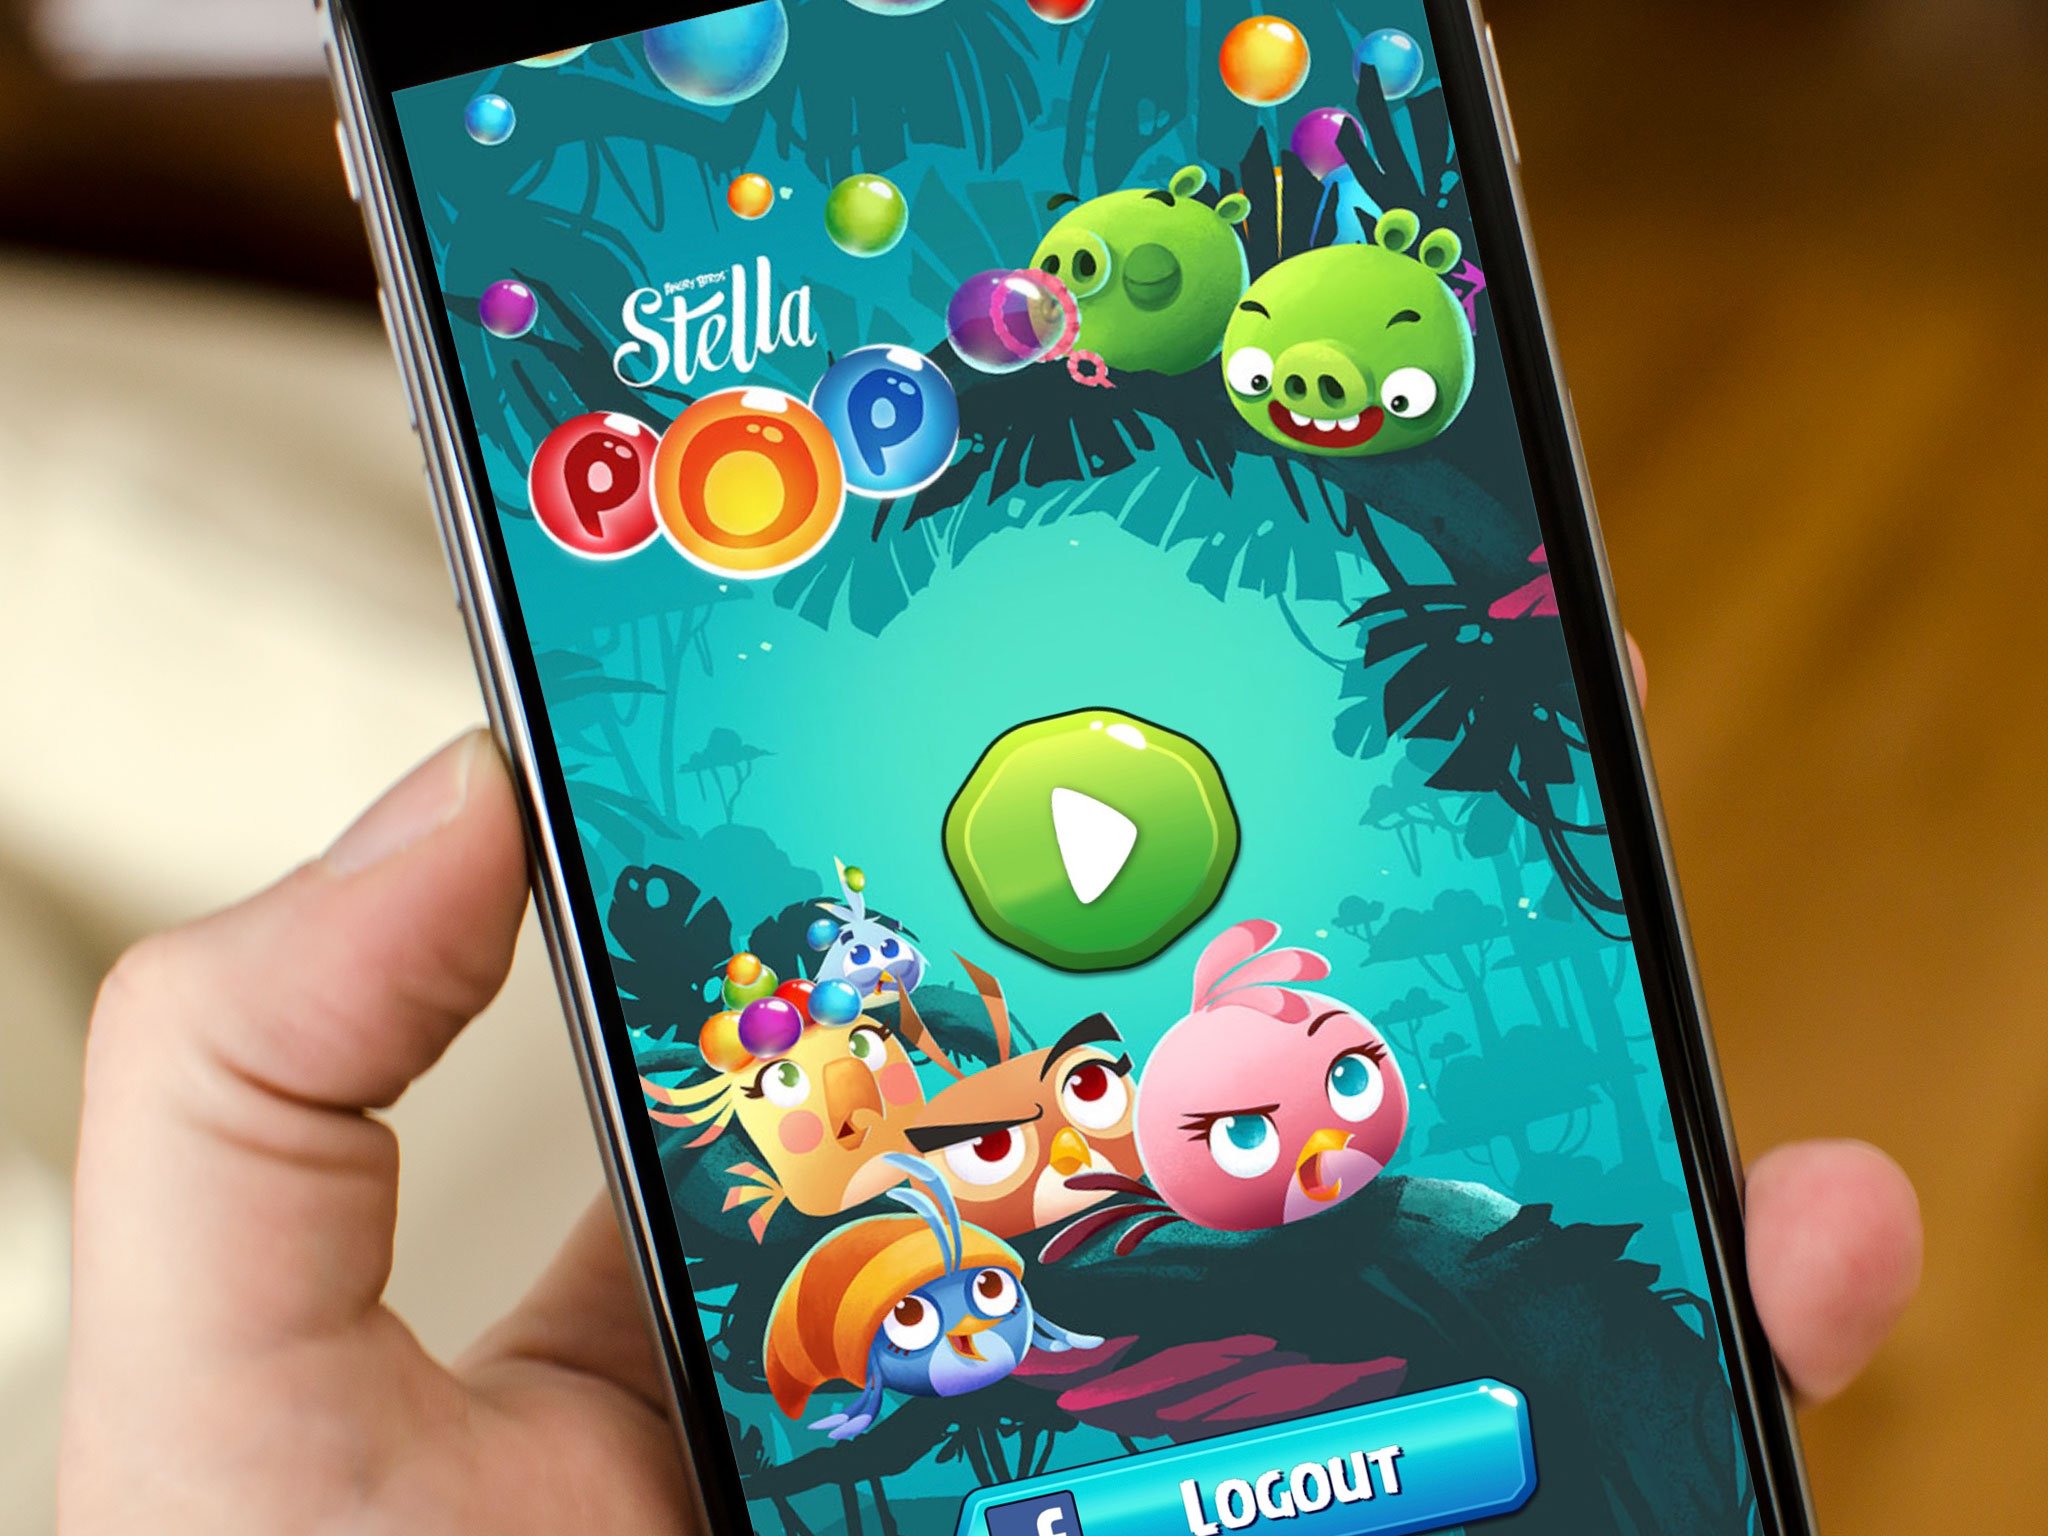 Angry Birds Stella POP! tips, hints, and cheats you need to know!